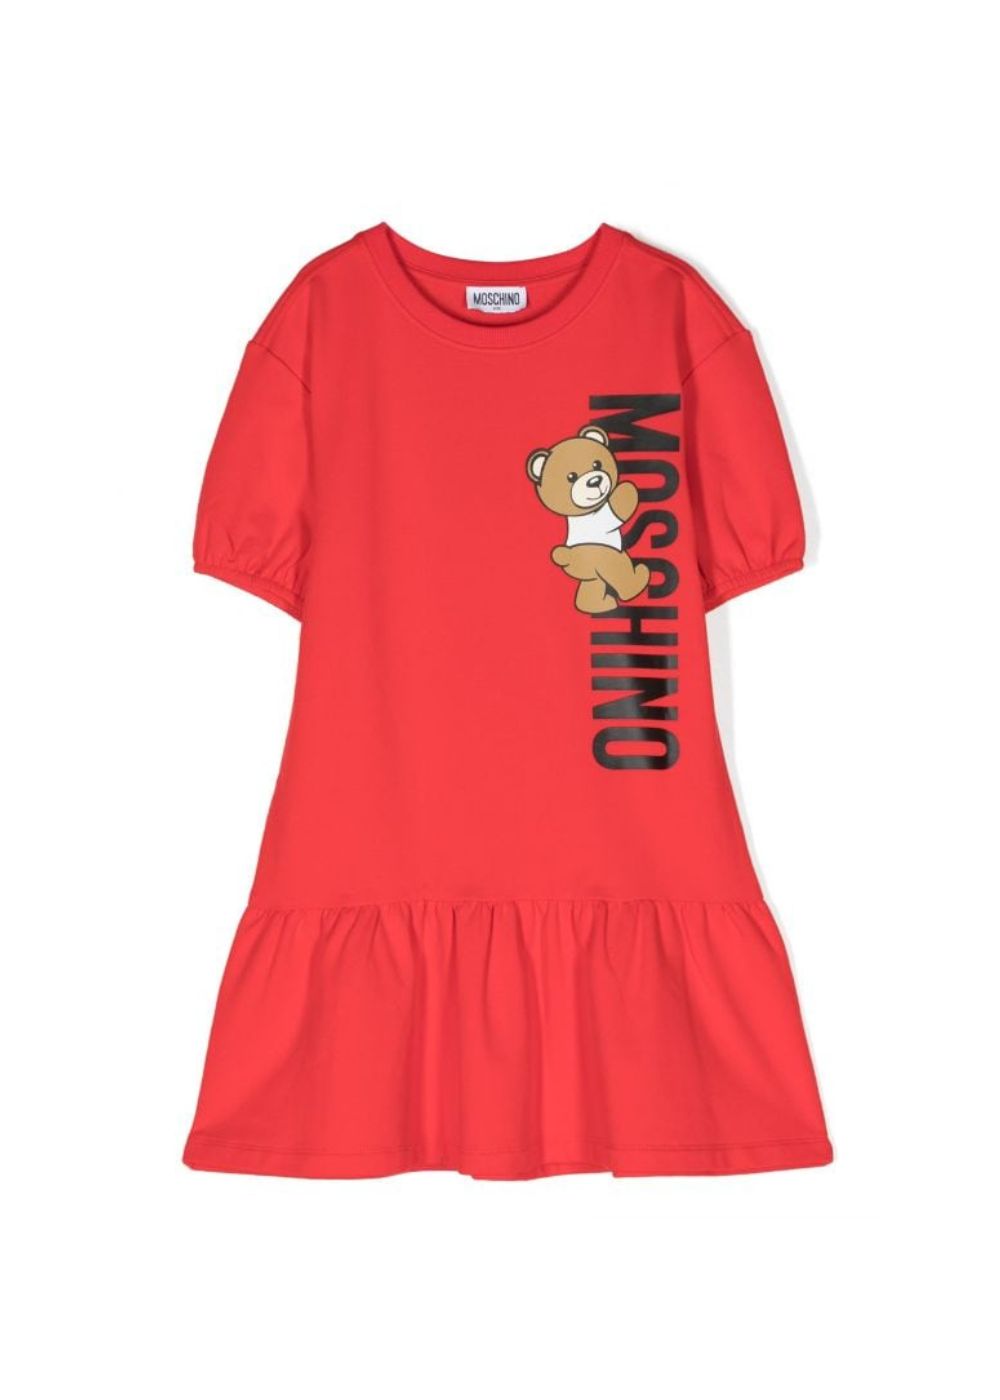 Featured image for “Moschino Abito Teddy Bear con stampa”